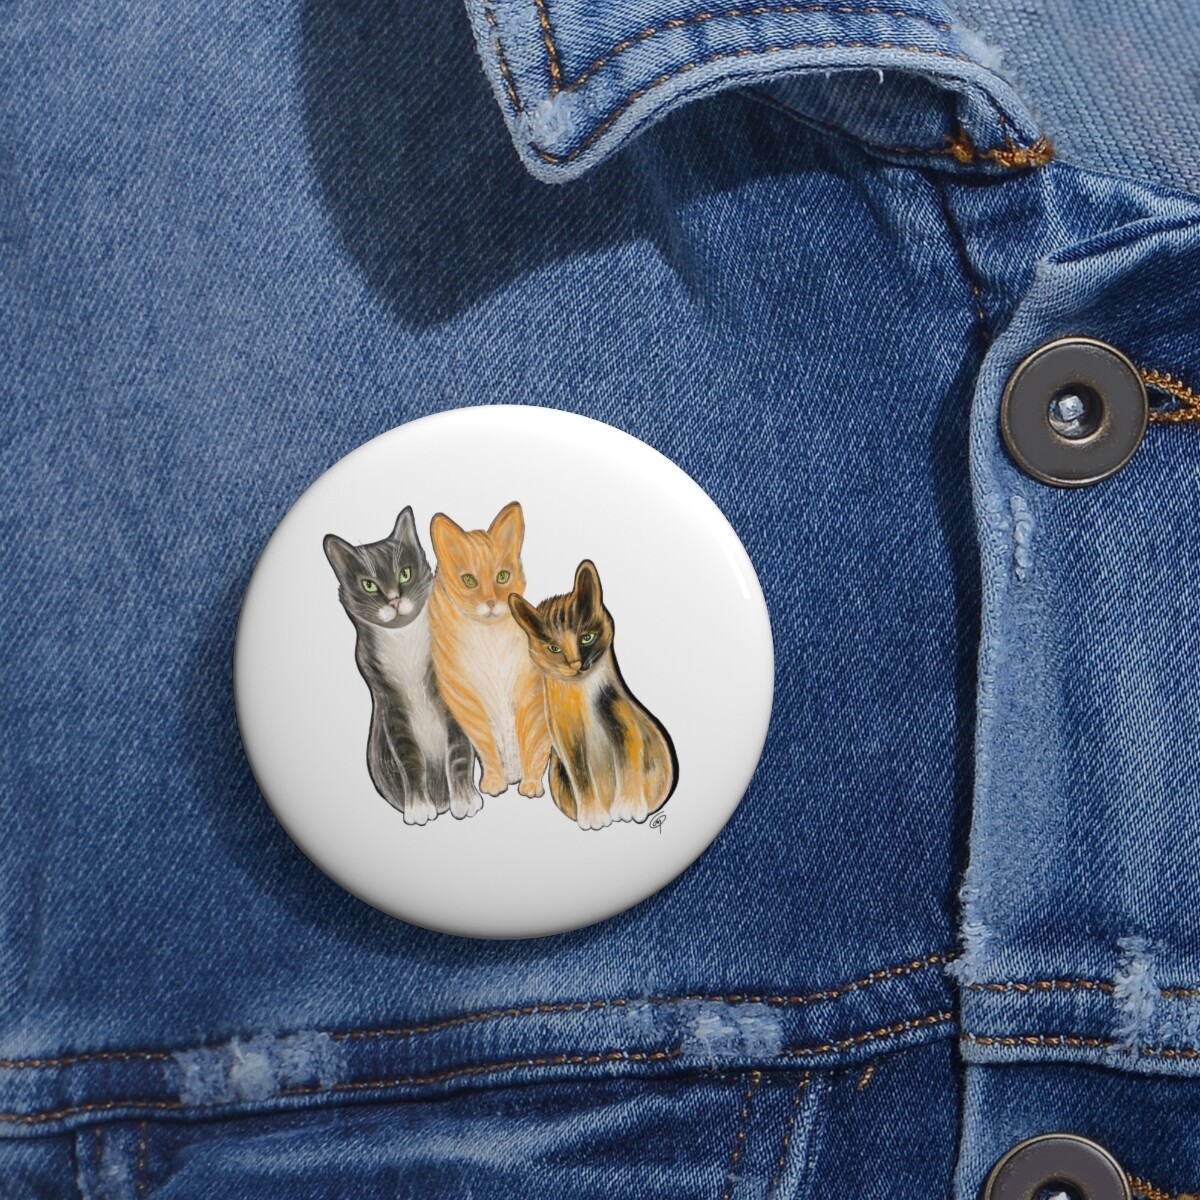 Personalized custom Pet portrait Pin Buttons 2 sizes 1.25" and 2" Create your own dog cat pet portrait Pin Buttons bulk Gift pin back